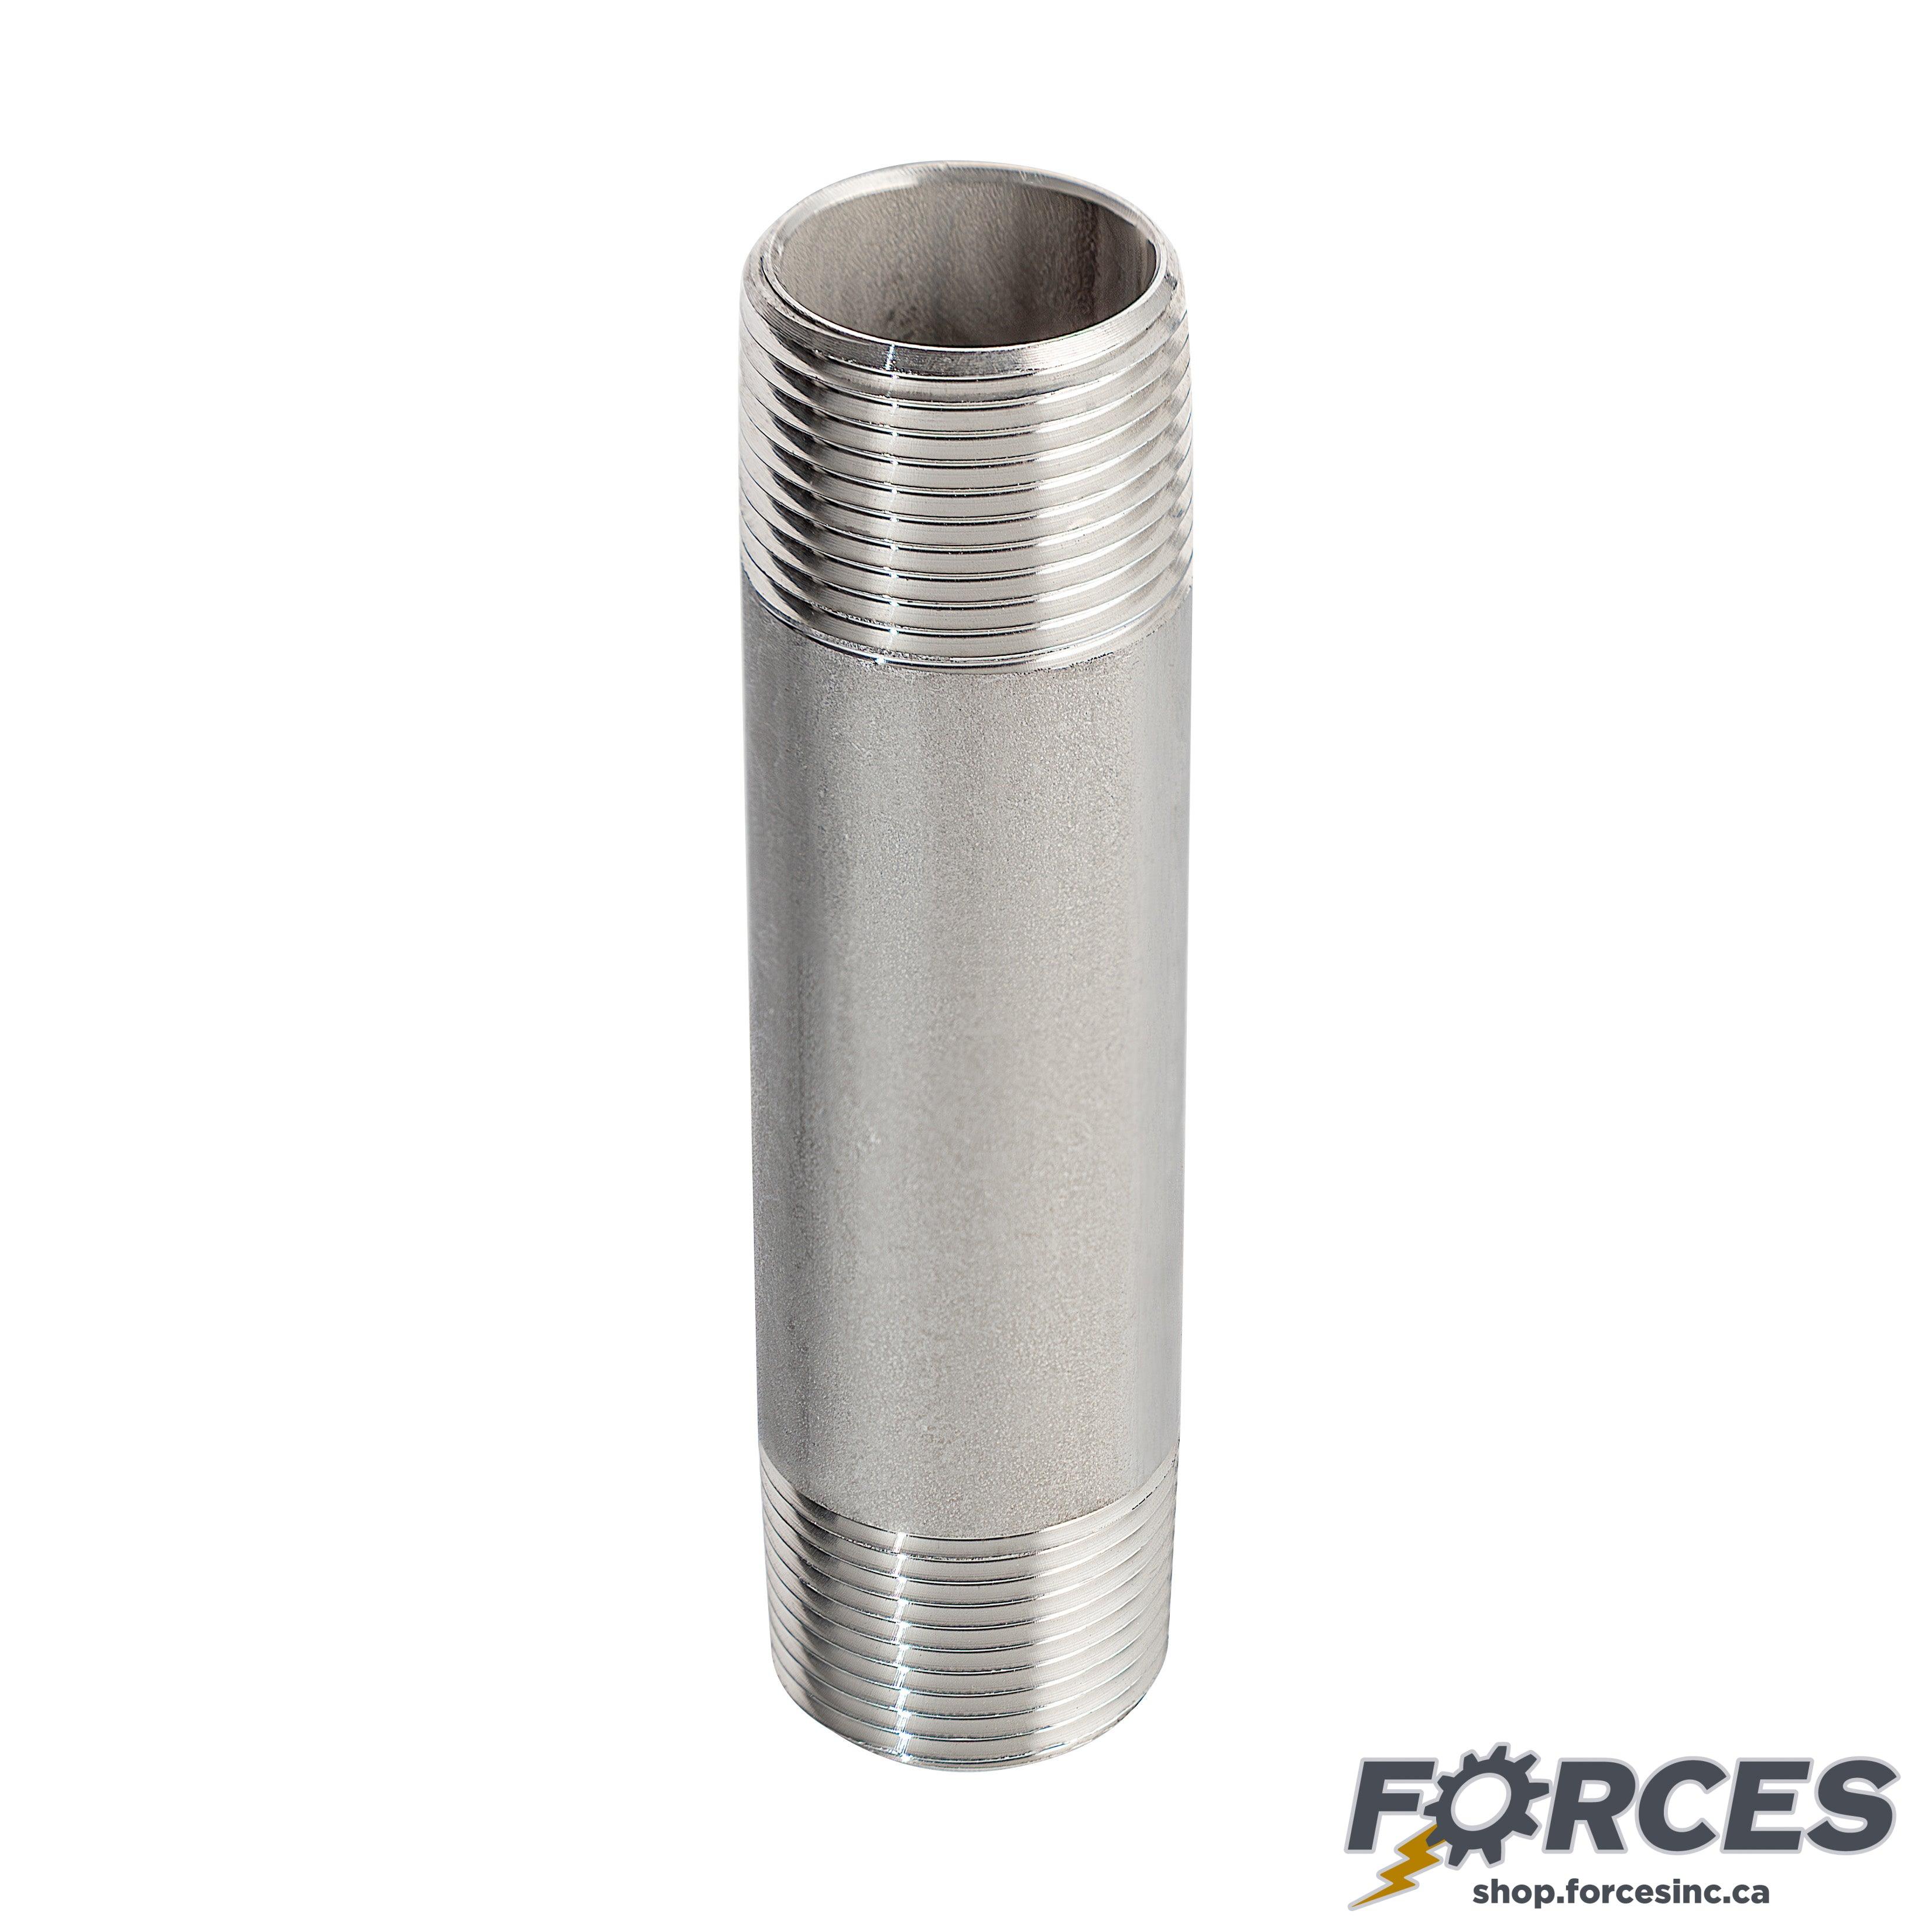 3/8" X 1-1/2" Long Nipple - Stainless Steel 316 - Forces Inc